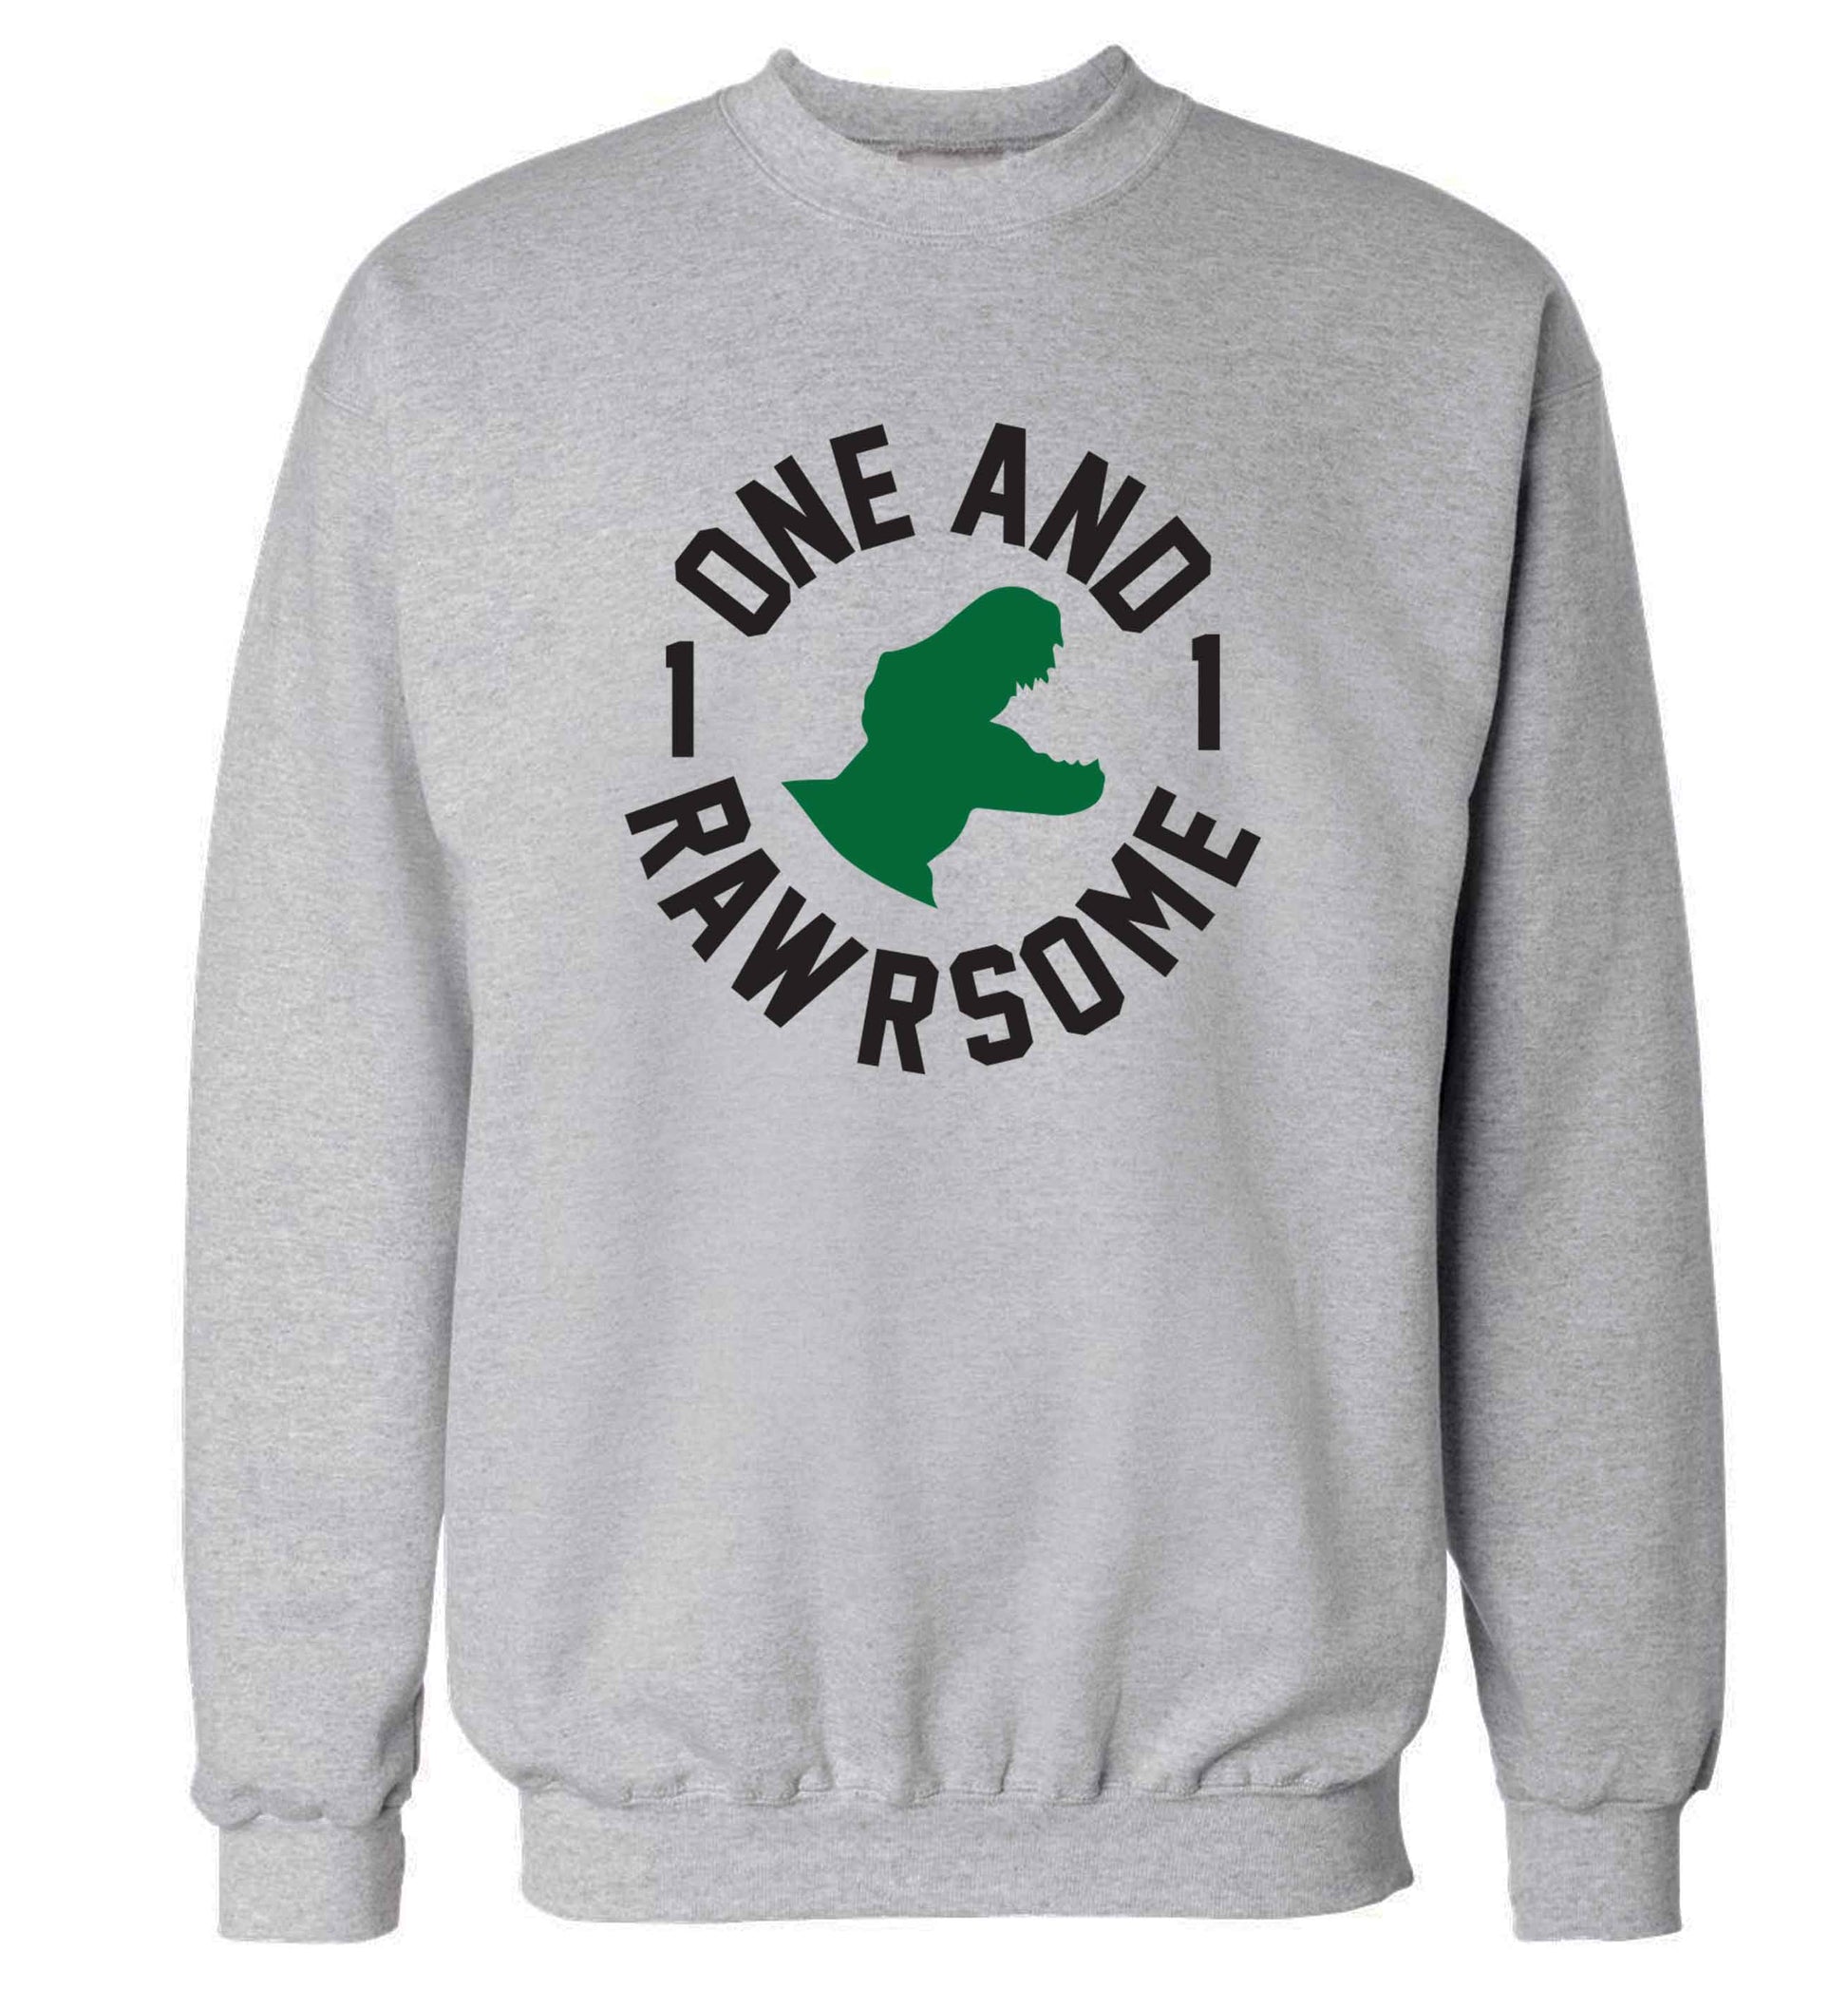 One and Rawrsome adult's unisex grey sweater 2XL